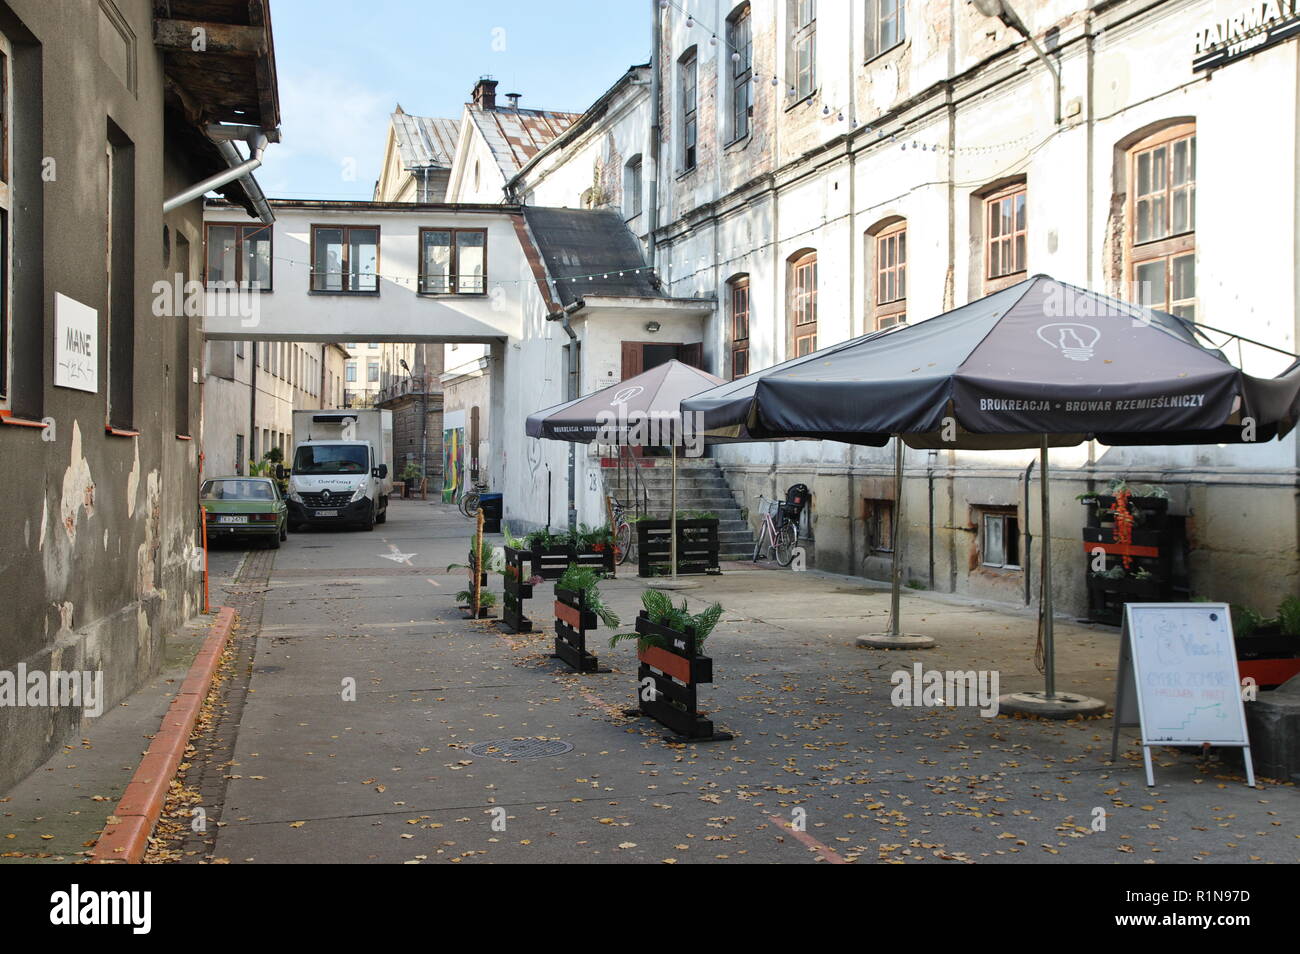 Poland, Cracow – November 07, 2018: Dolnych Mlynow street, old industrial complex in the city center. Tobacco factory founded by the Austrians in 1876 Stock Photo